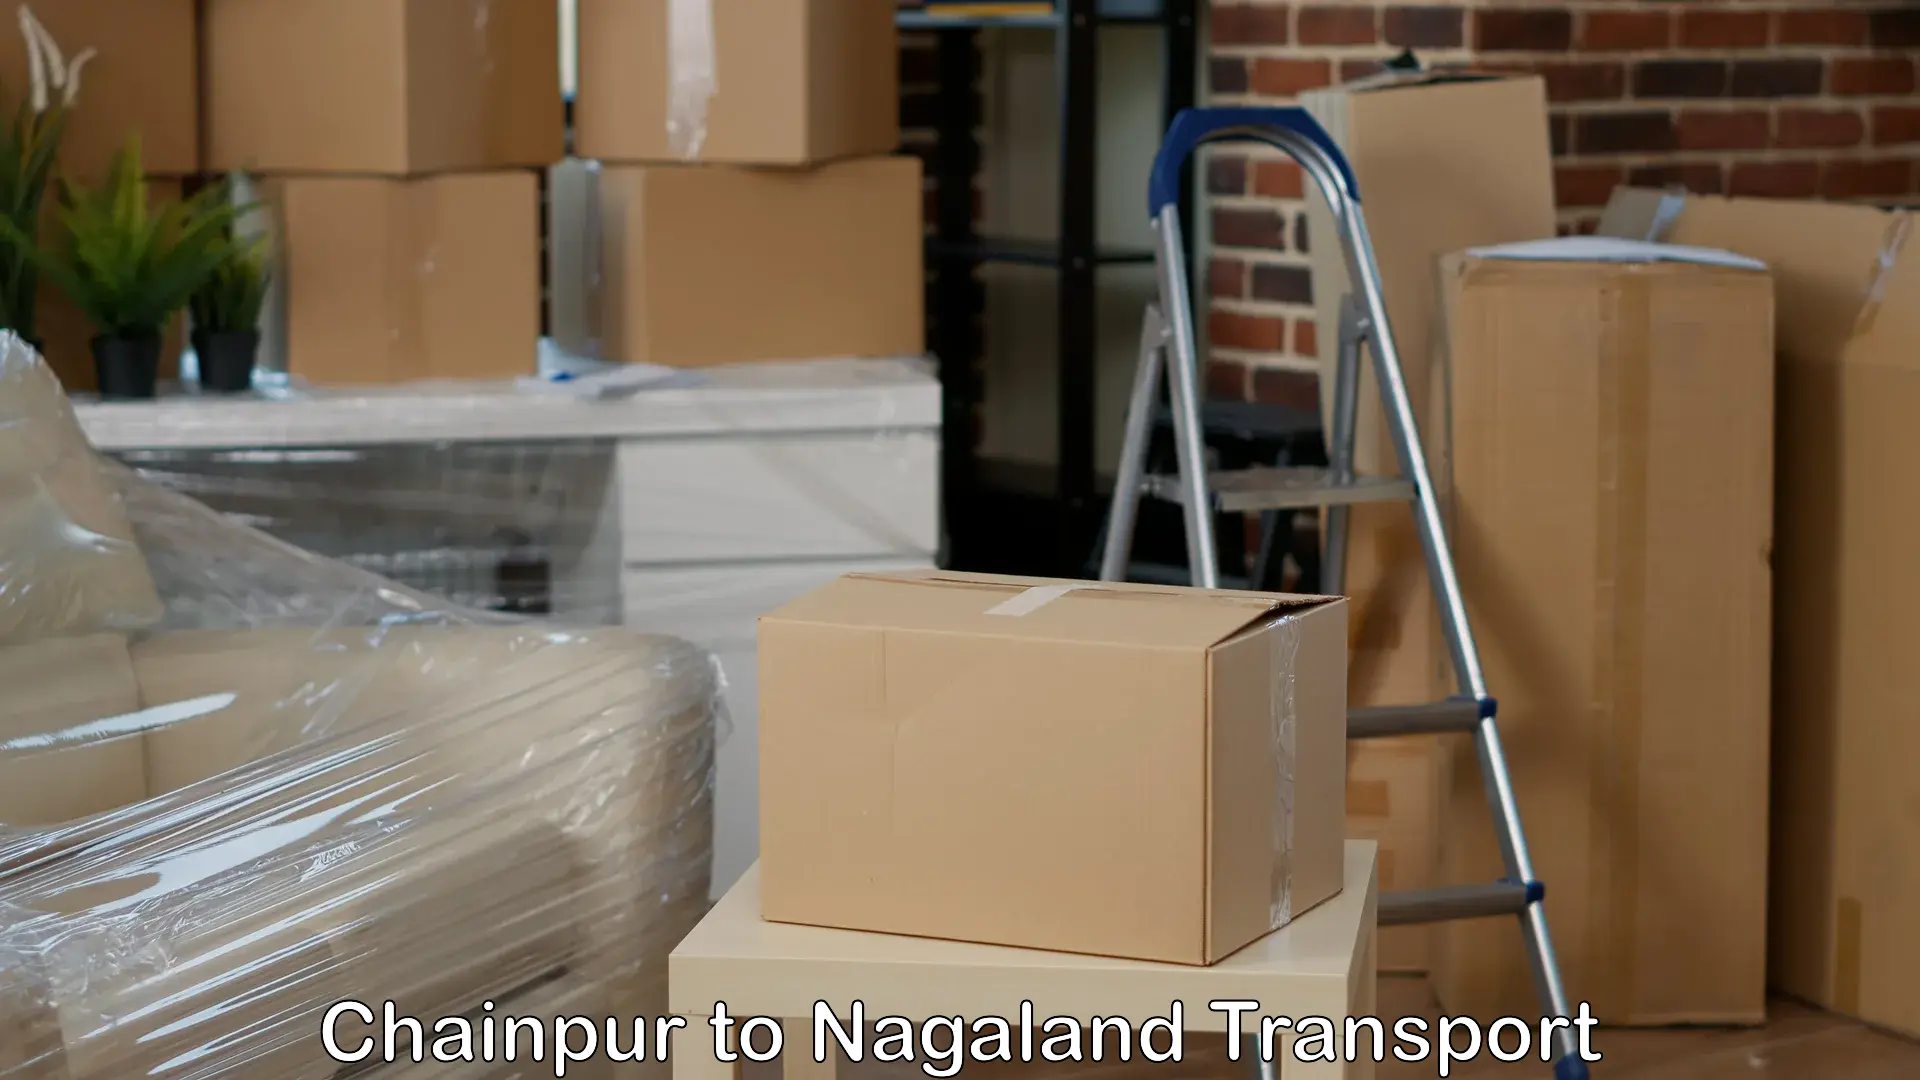 Daily transport service Chainpur to Longleng